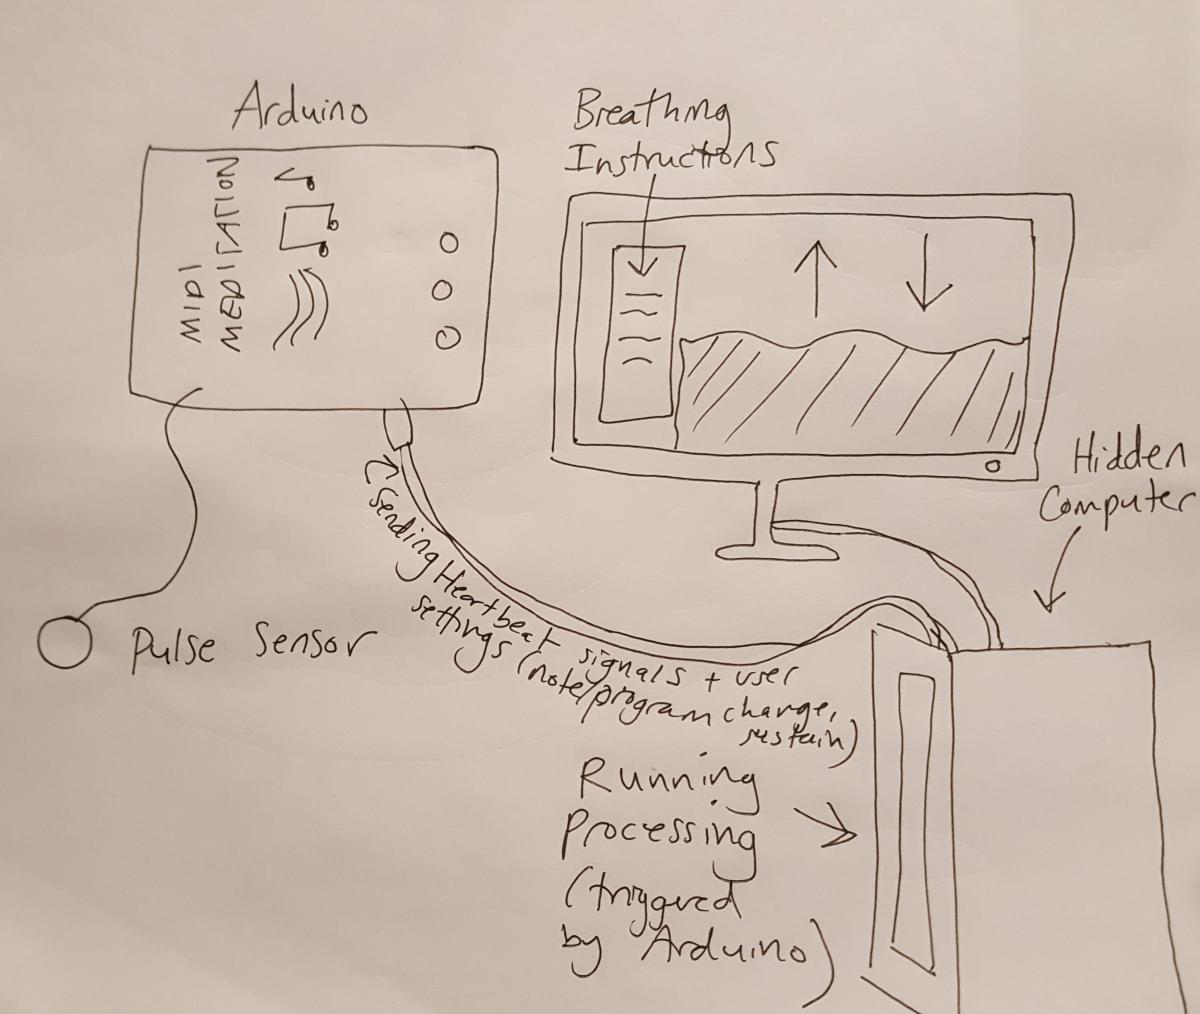 drawing of pulse sensor connected to an arduino, connected to a hidden computer, connected to a computer monitor